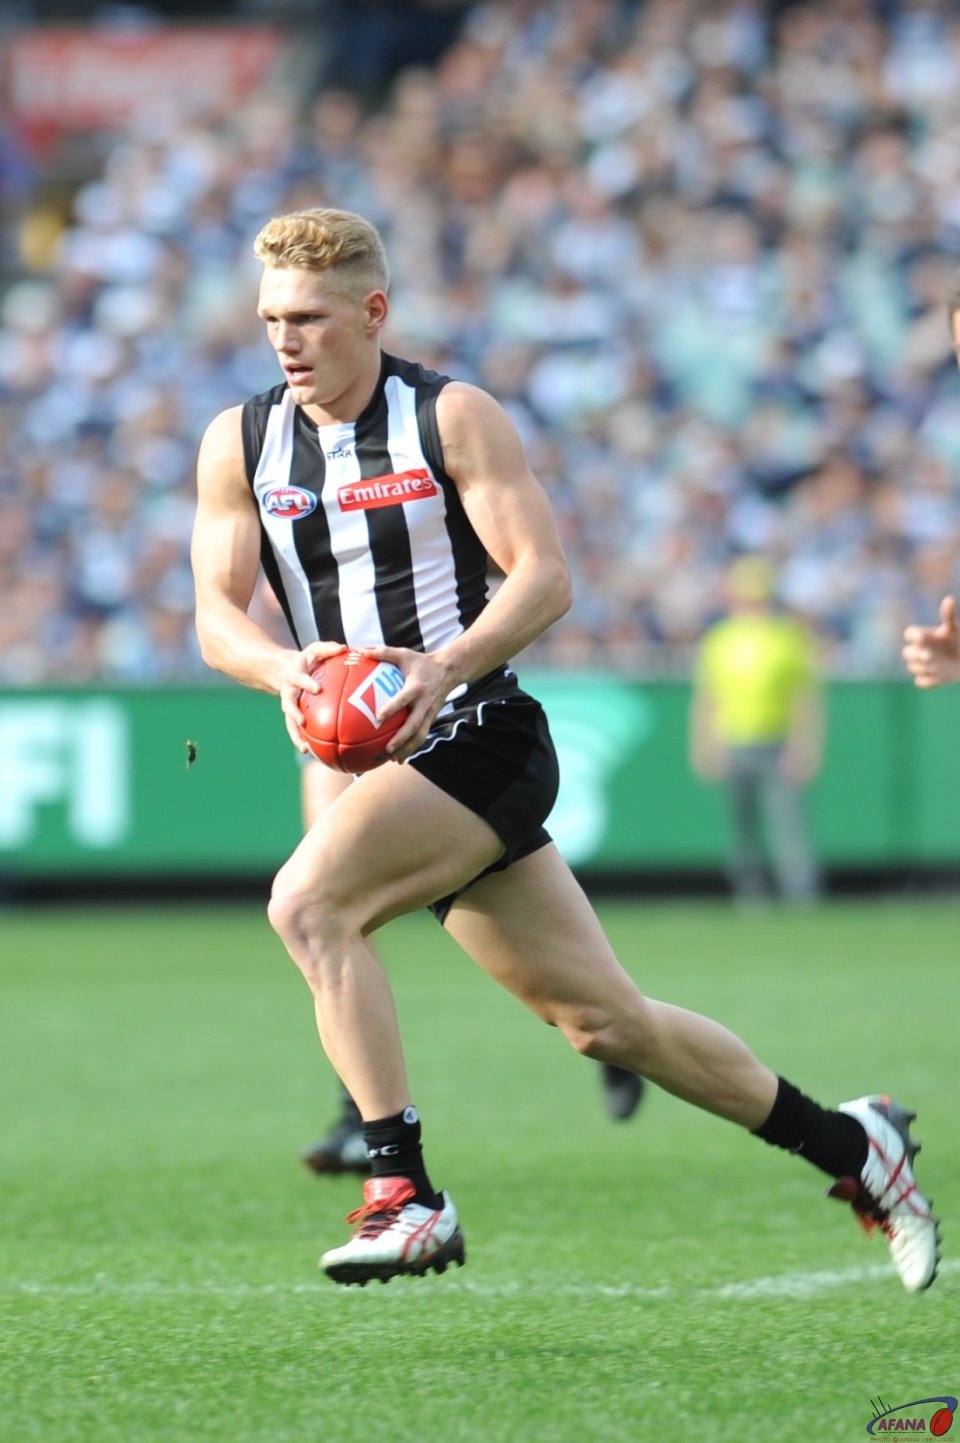 Treloar bursts through the centre and heads for goals